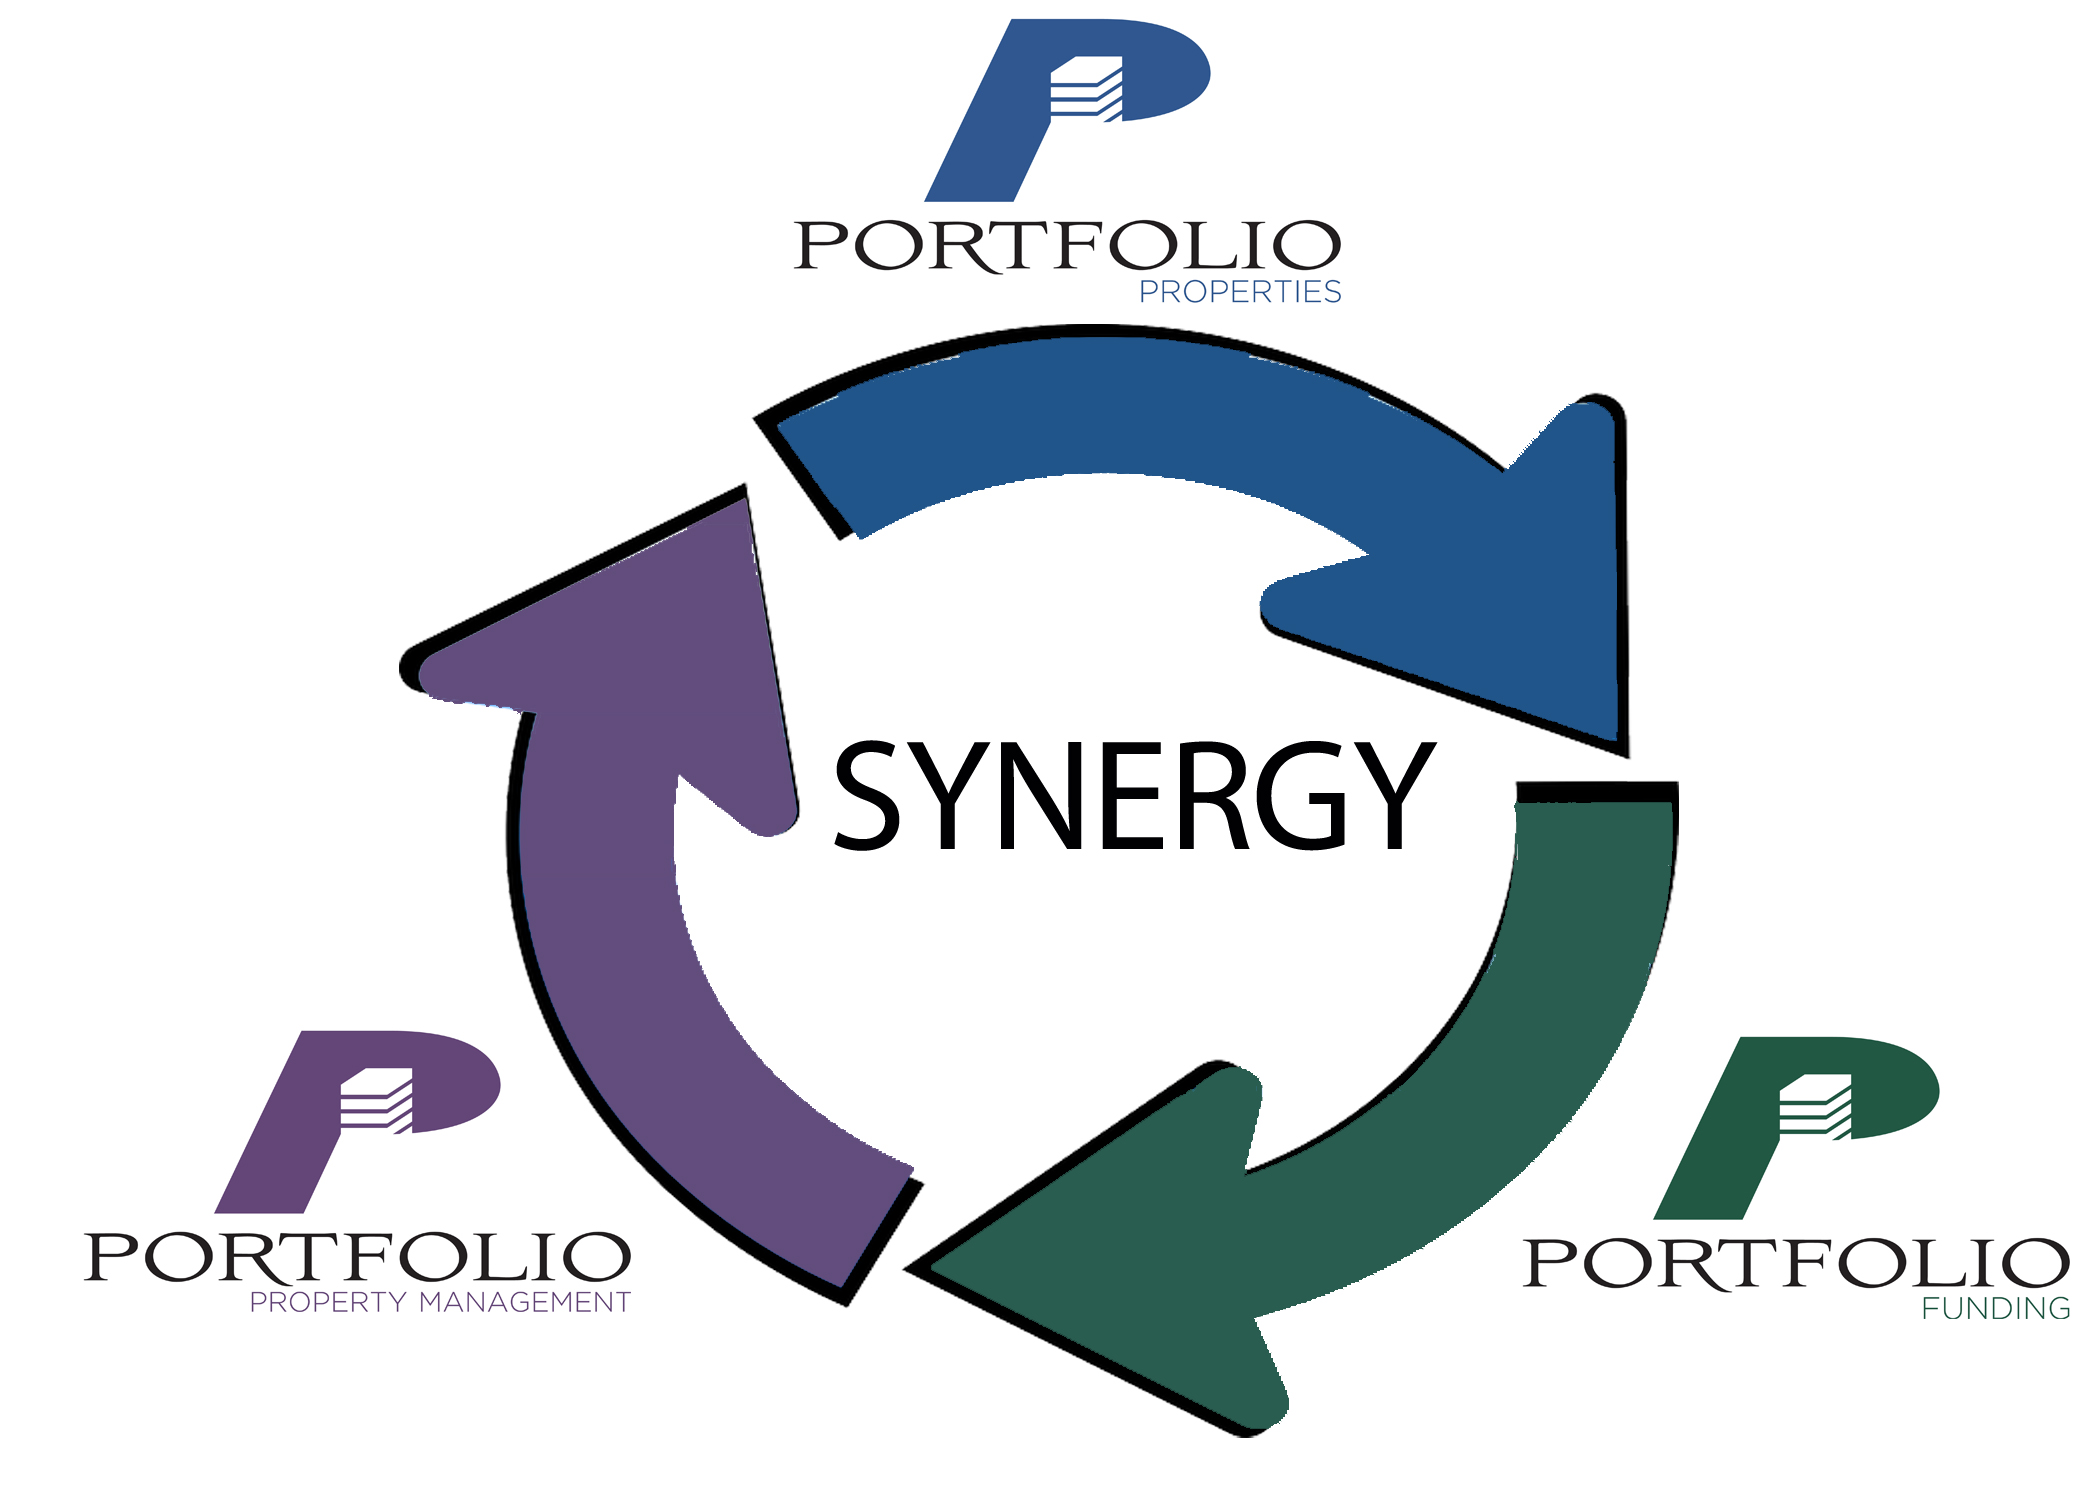 synergy solutions logo